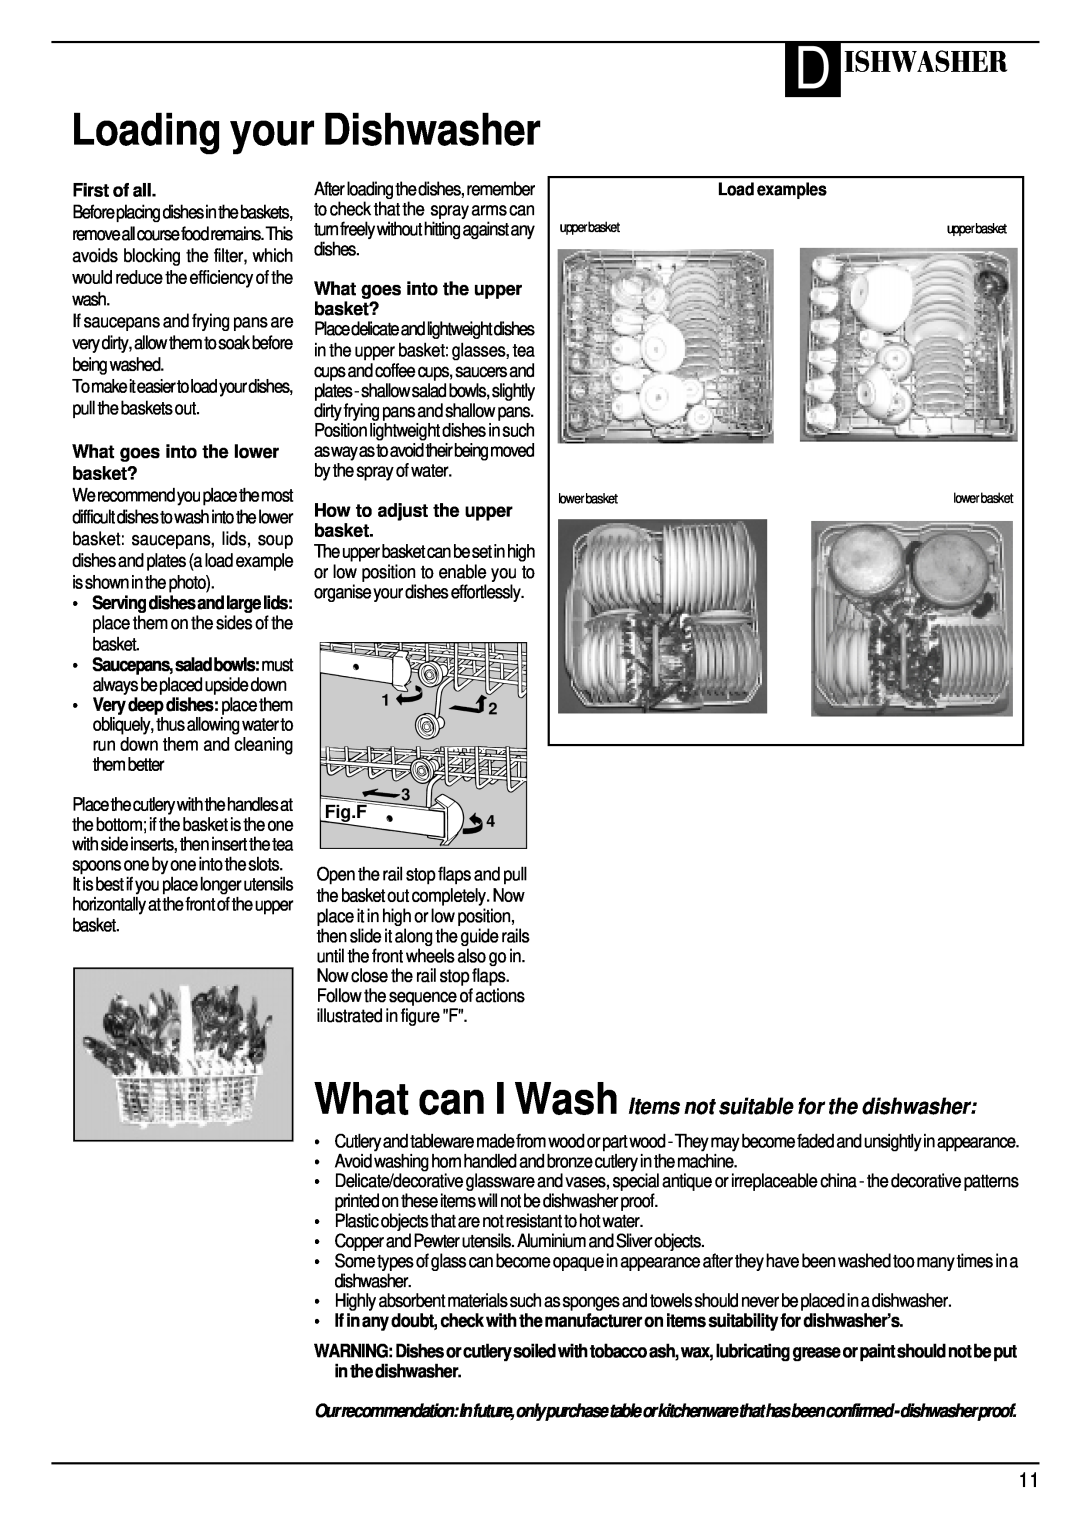 Hotpoint BFI62 Loading your Dishwasher, D Ishwasher, First of all, What goes into the lower basket?, Fig.F, Load examples 